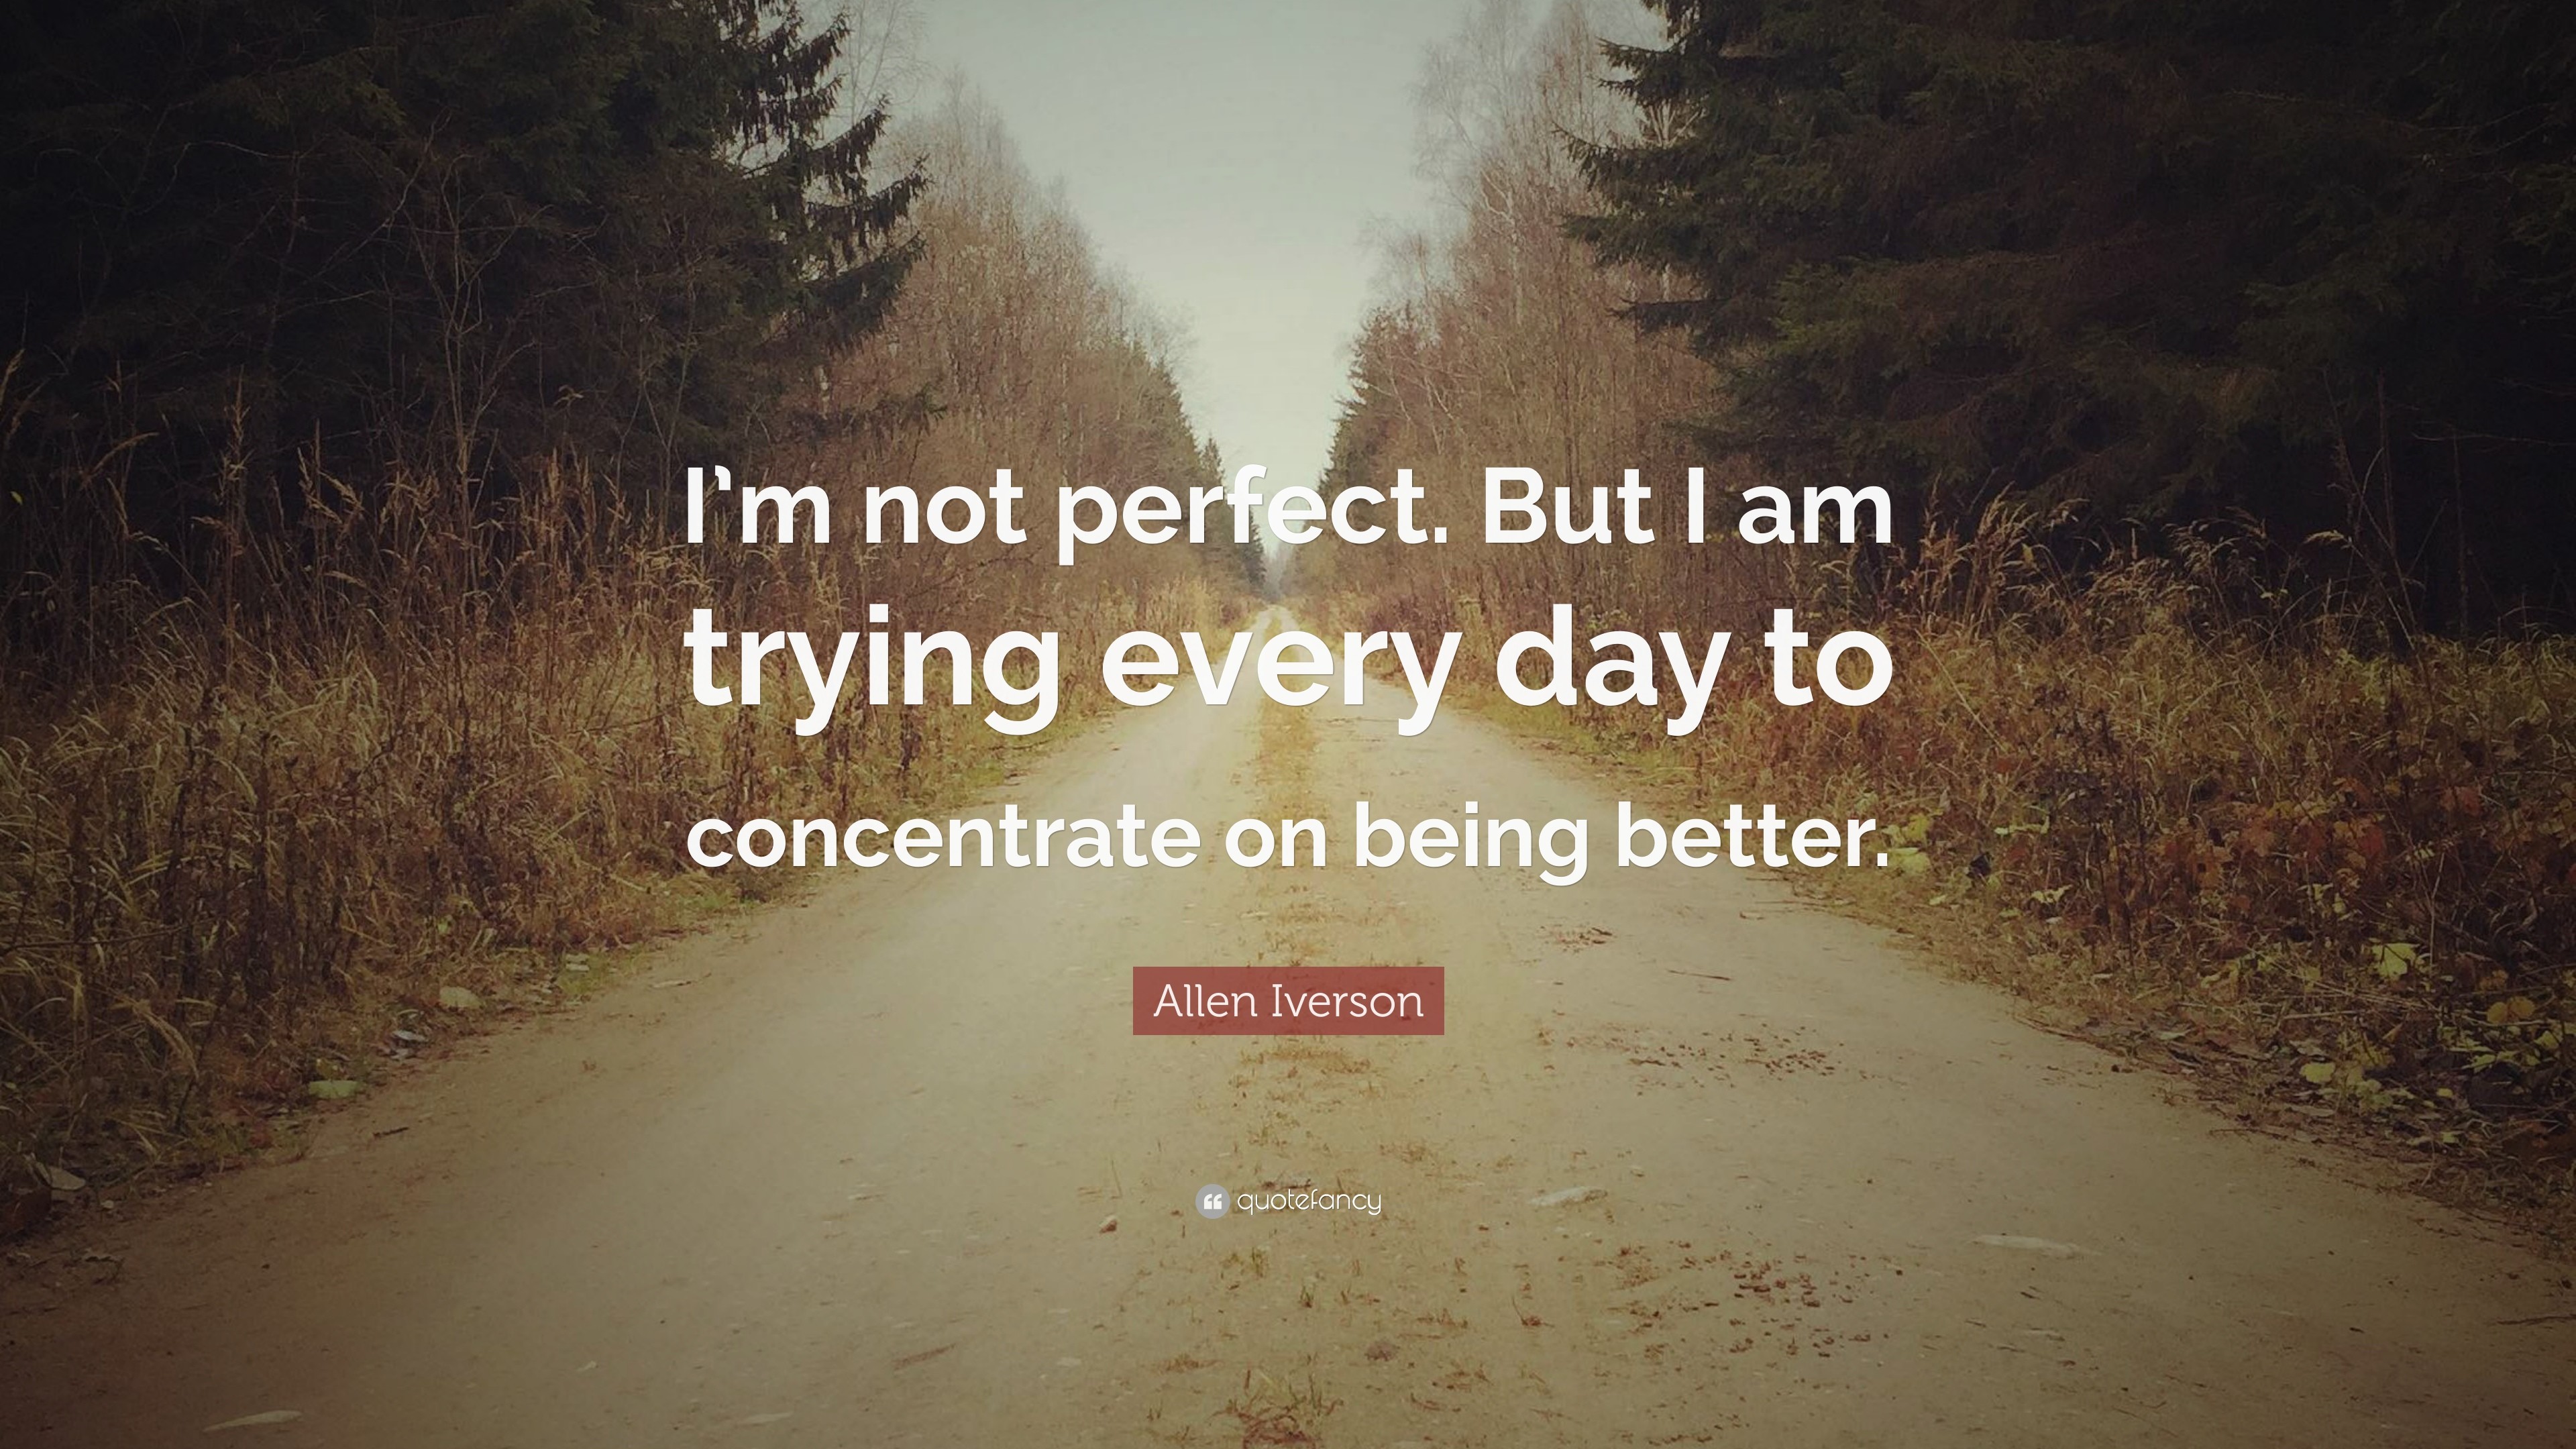 3840x2160 Allen Iverson Quote: “I'm not perfect. But I am trying every